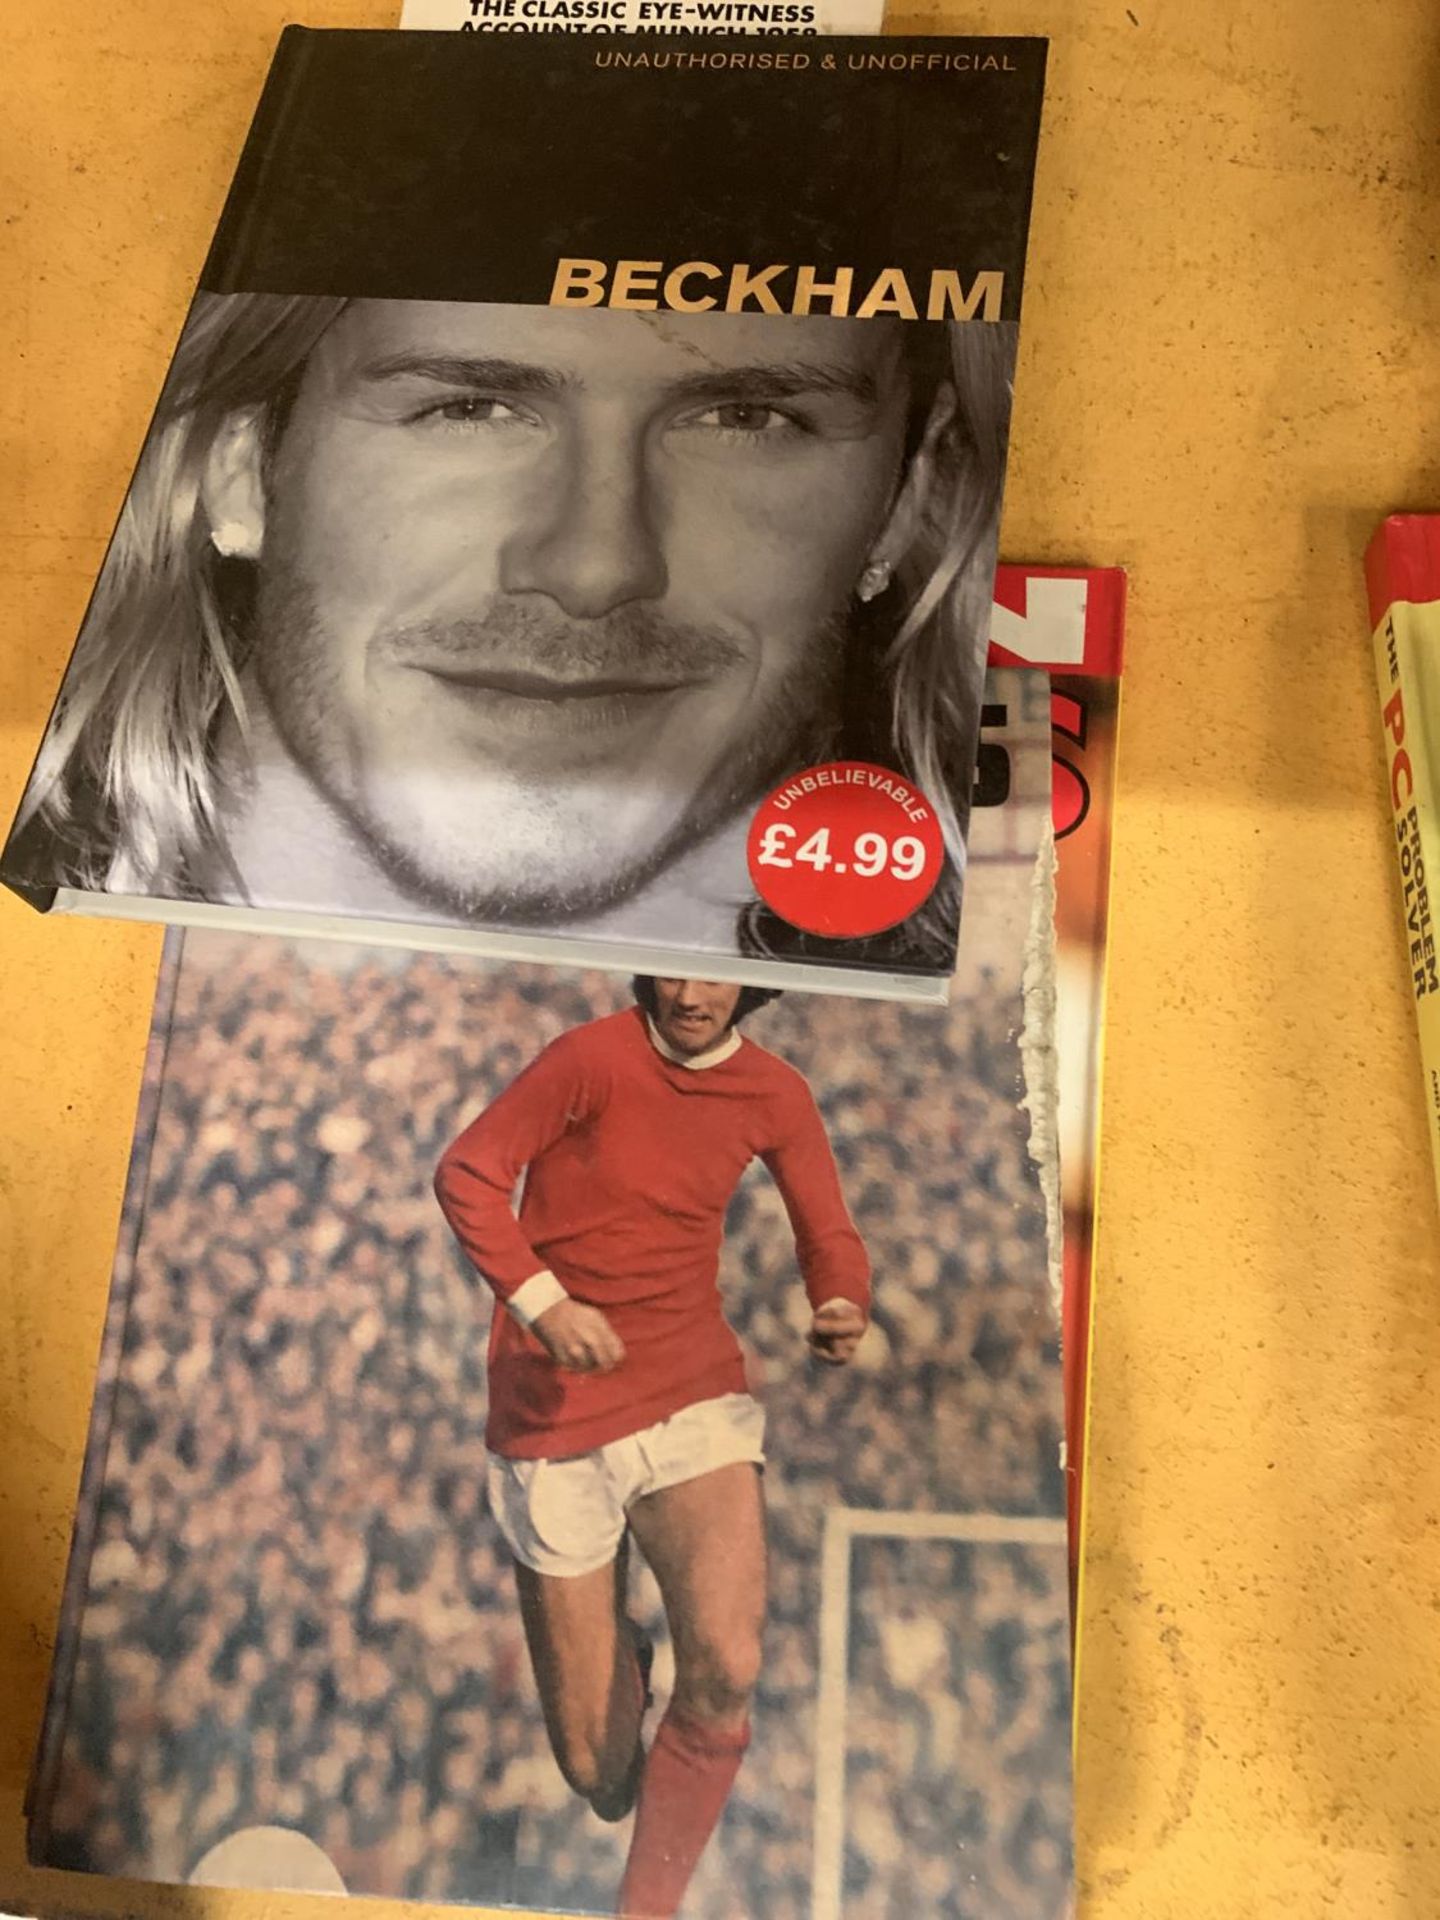 A QUANTITY OF MANCHESTER UNITED BOOKS TO INCLUDE 'THE DAY A TEAM DIED', 'BECKHAM', ETC - Image 2 of 3